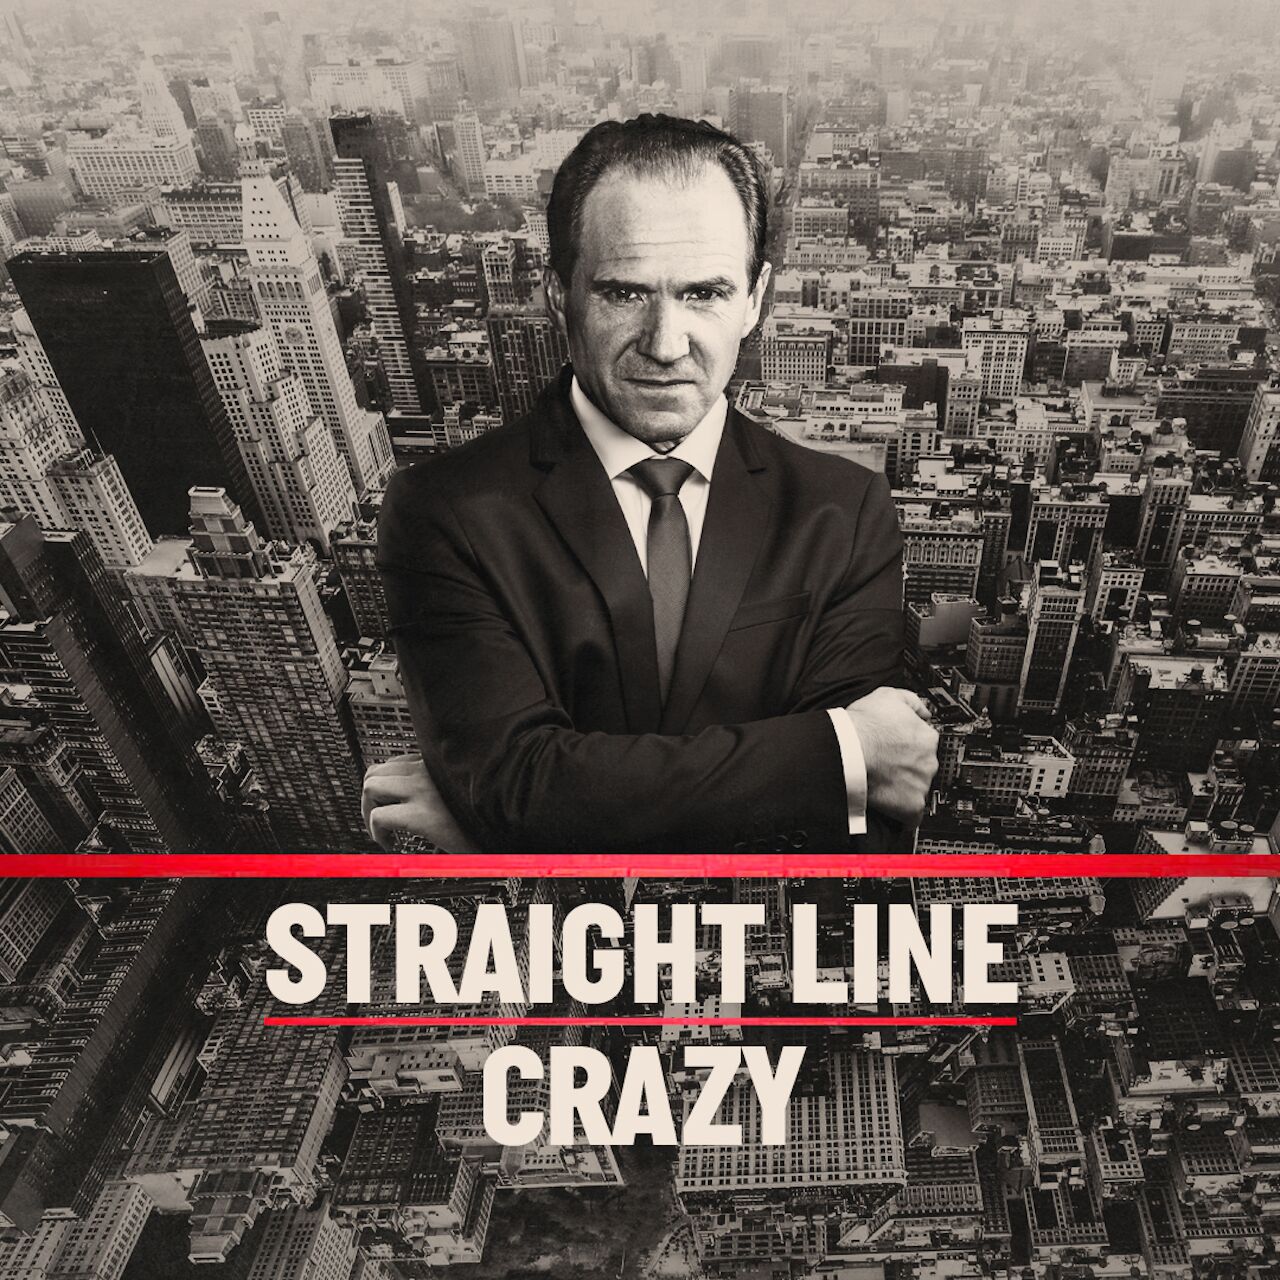 Poster for "Straight Line Crazy", one of the best London shows in 2022